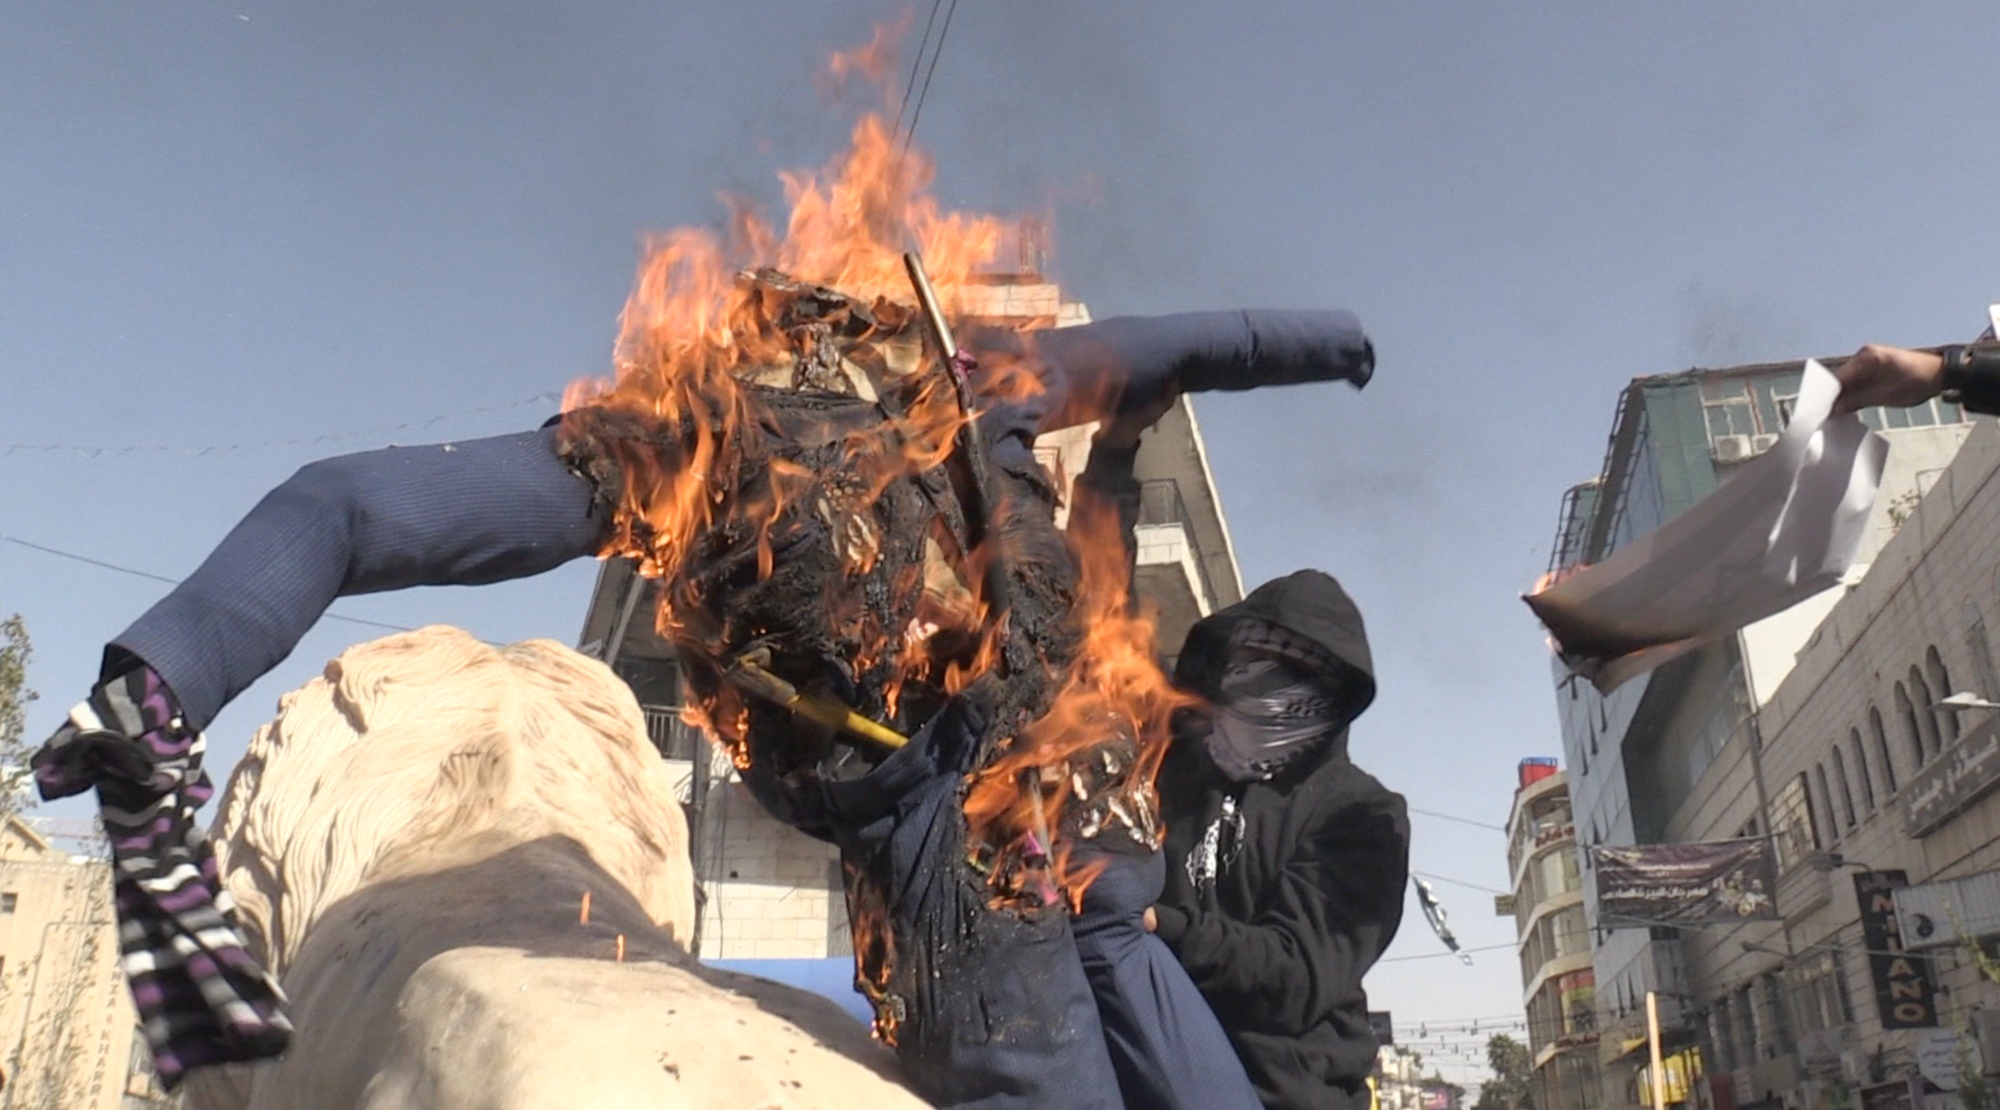 A Palestinian protester sets fire to an effigy of Donald Trump in the occupied West Bank city of Ramallah on 26 November (MEE/ Hisham Abu Shaqrah)